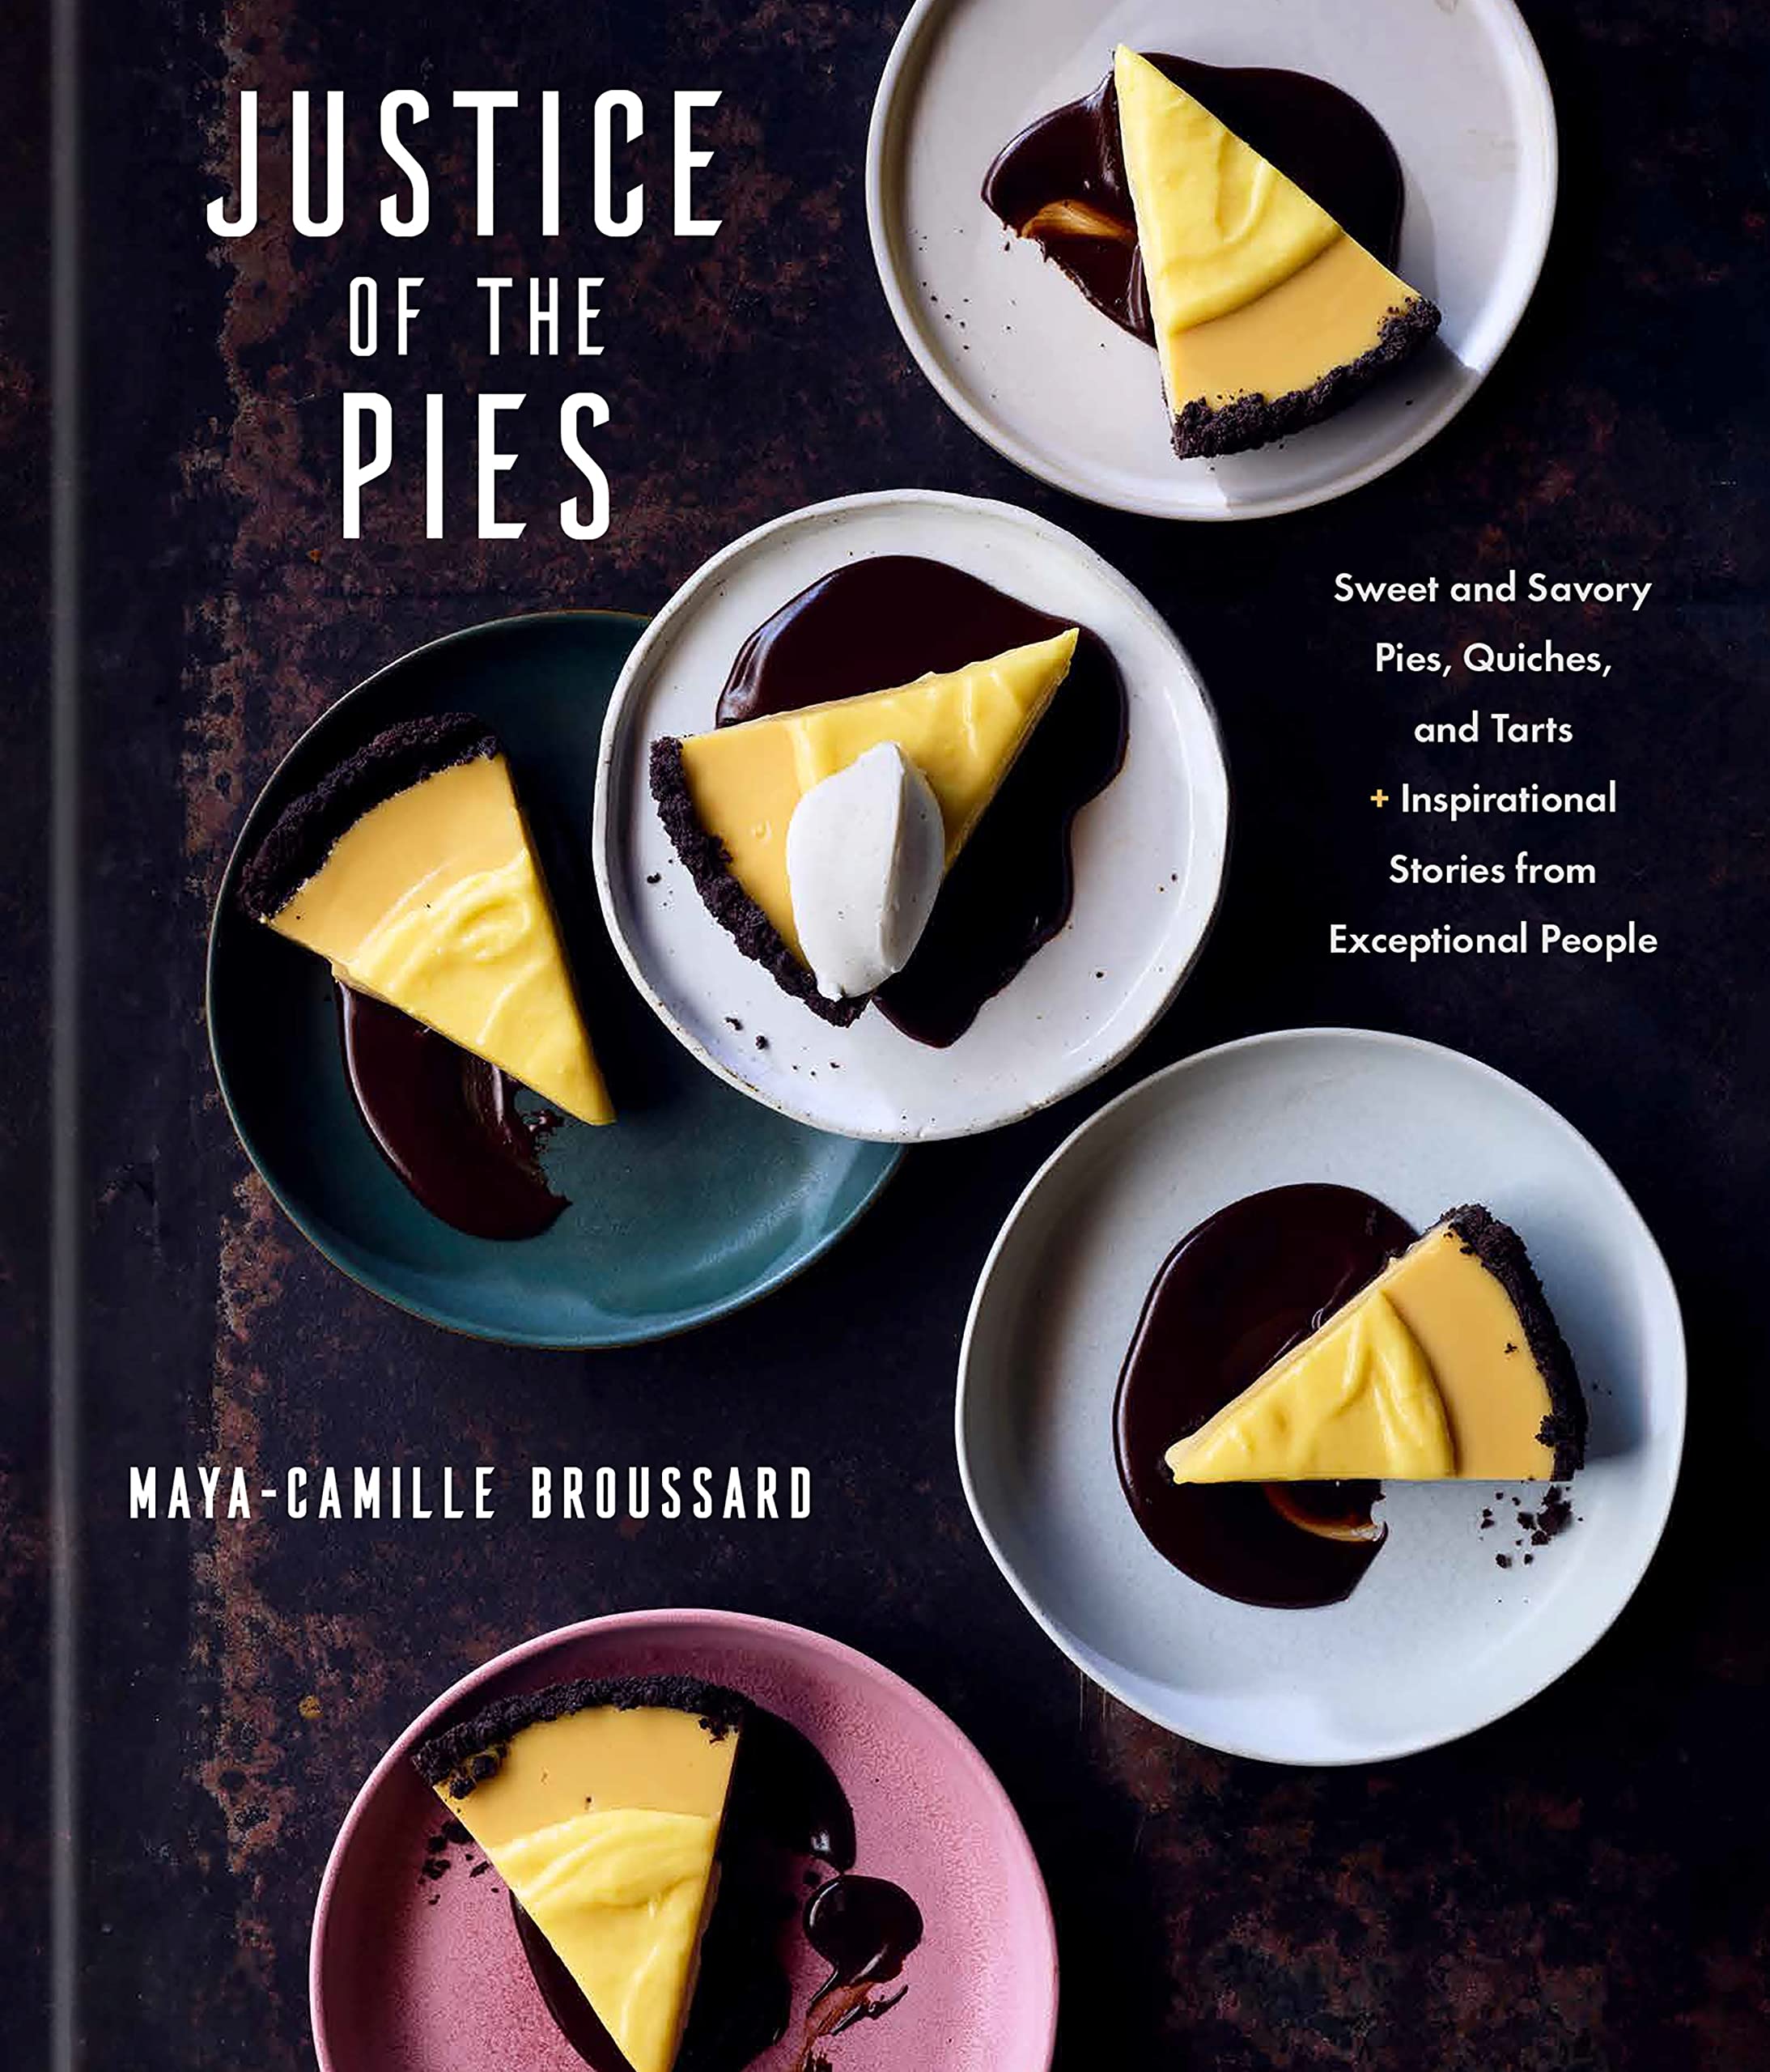 Justice of the Pies: Sweet and Savory Pies, Quiches, and Tarts plus Inspirational Stories from Exceptional People: A Baking Book (Maya-Camille Broussard) *Signed*